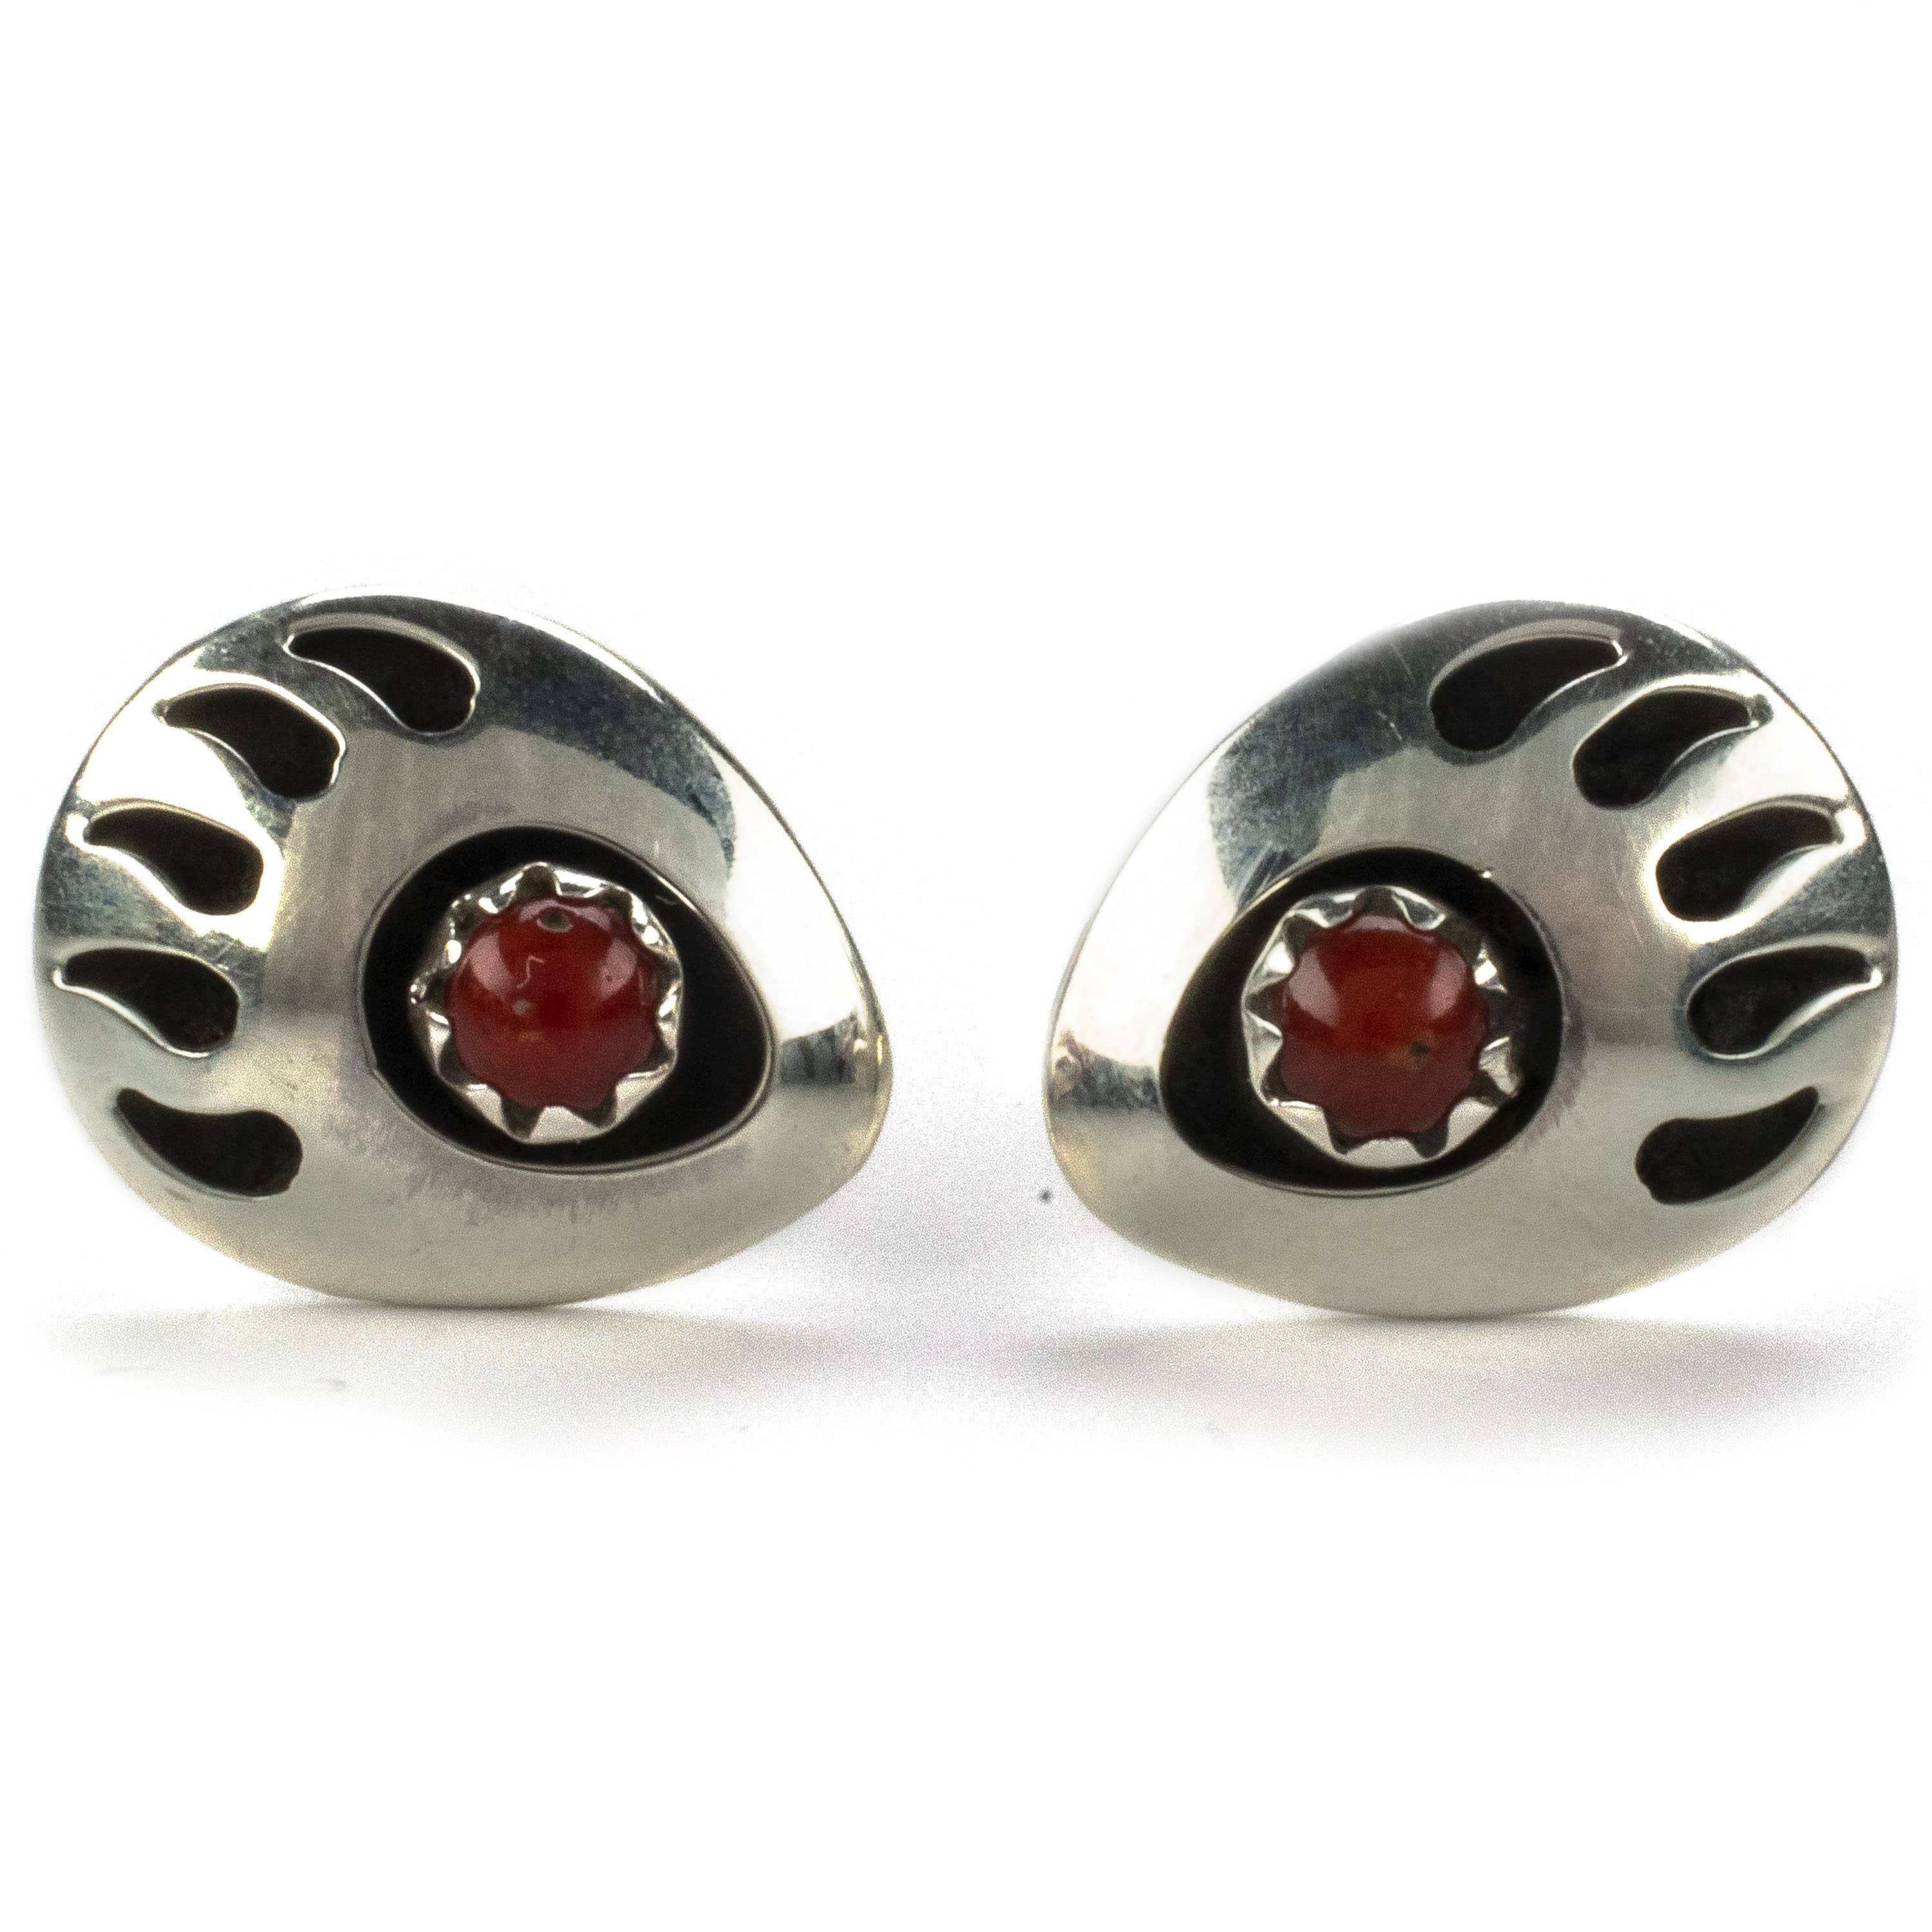 Kalifano Native American Jewelry Bear Claw with Coral Inlay USA Native American Made 925 Sterling  Silver Earrings with Stud Backing NAE60.002